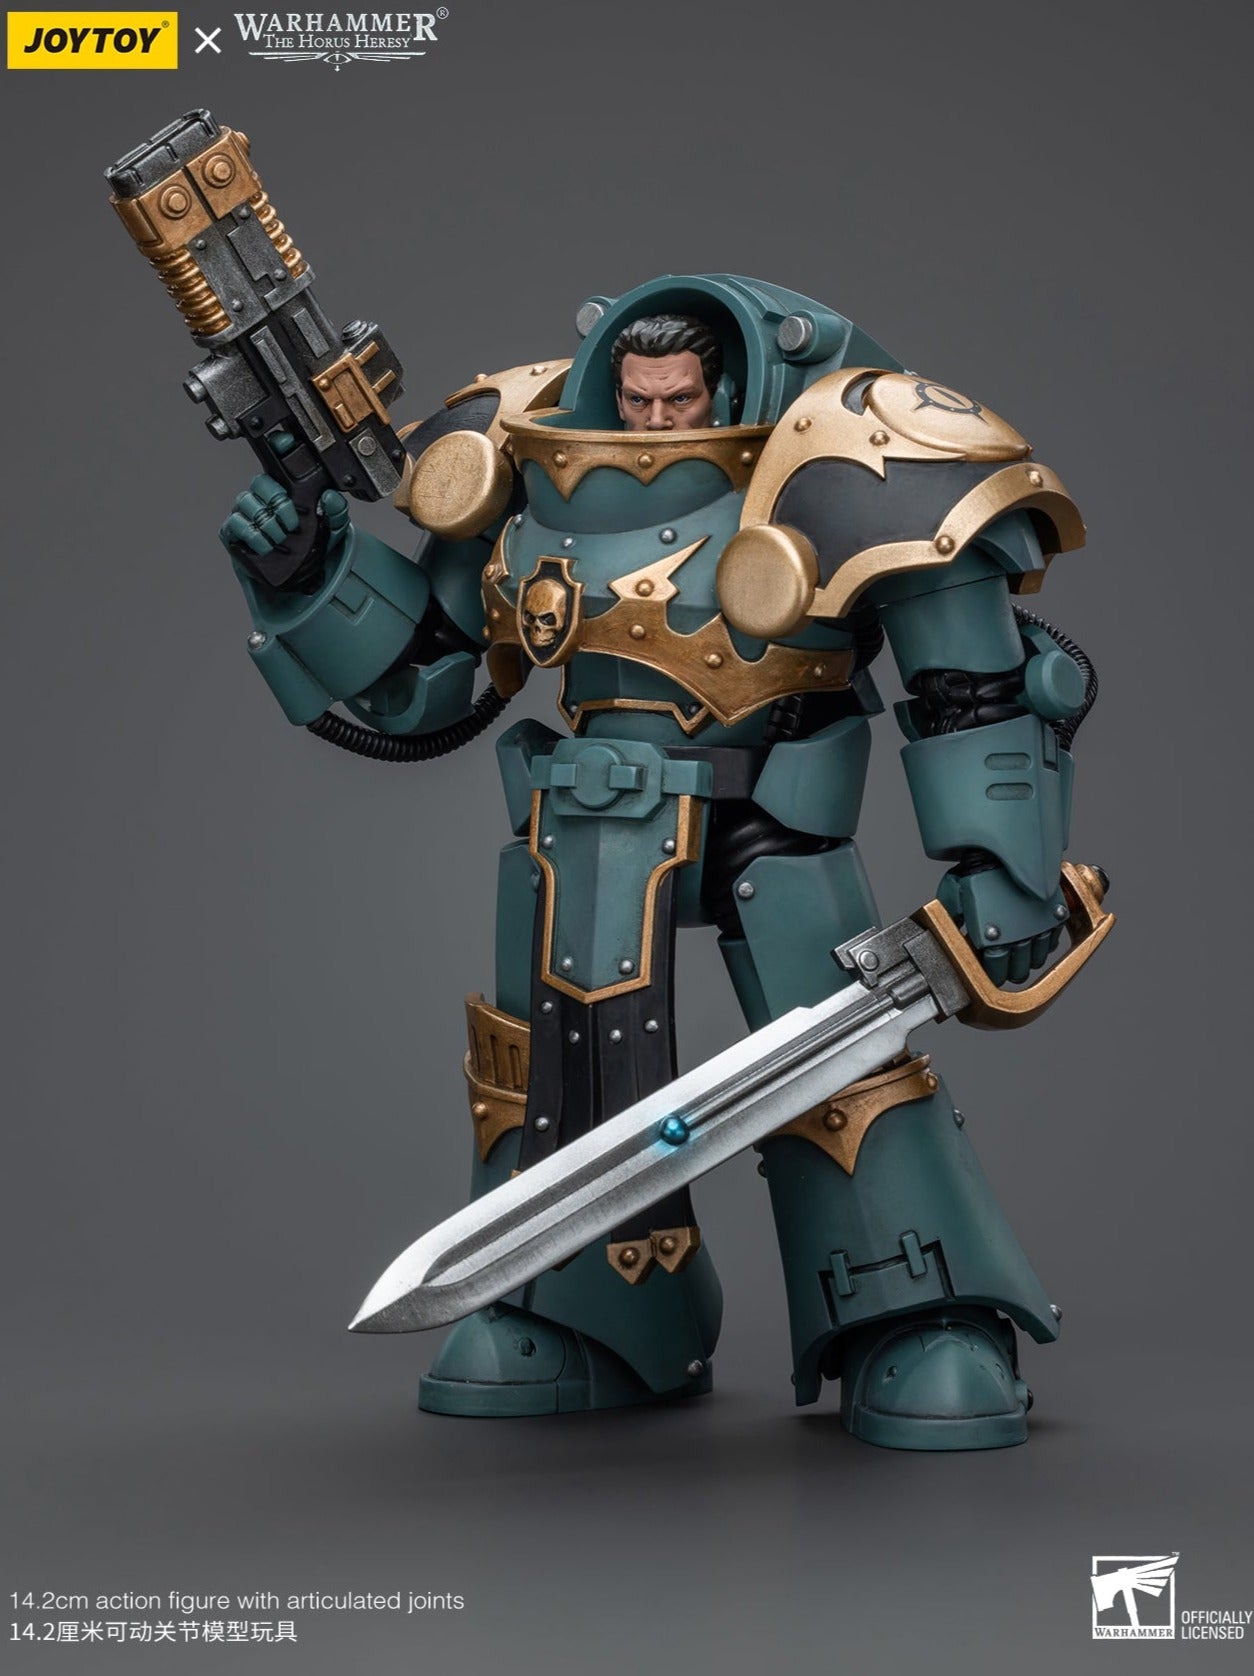 Warhammer The Horus Heresy: Sons Of Horus: Tartaros Terminator Squad Sergeant With Volkite Charger And Power Sword: Joy Toy